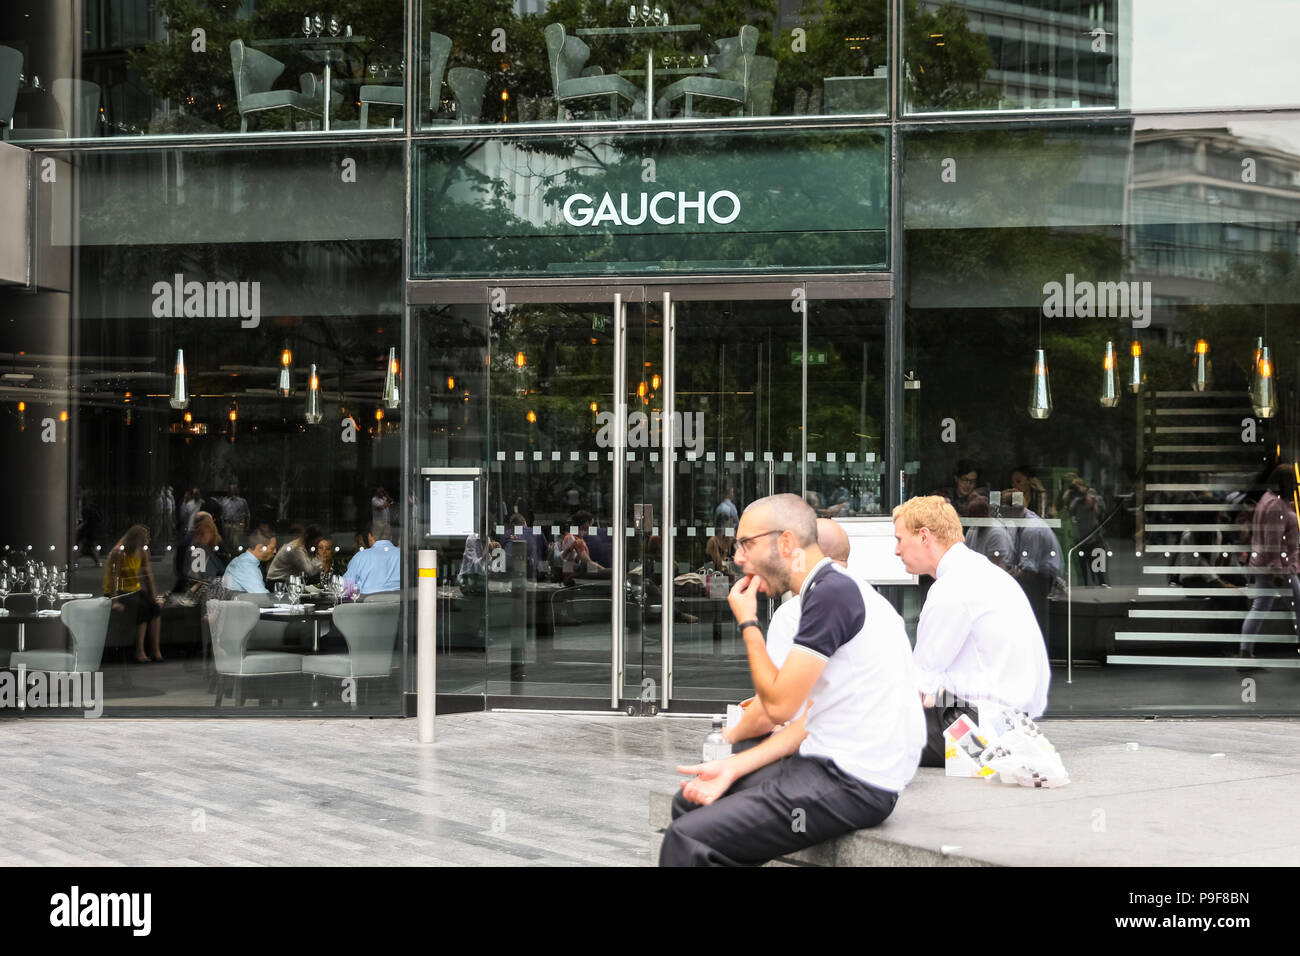 London, 18th July 2018. Pictured: Gaucho restaurant in More London near City Hall and Tower Bridge, London. Directors of the business have reportedly filed a note of intent to appoint administrators, if a financial rescue solution cannot be found, this follows repeated attempts to find a buyer for the business, which includes the Argentinean themed restaurants Gaucho, as well as Cau chain. Credit: Imageplotter News and Sports/Alamy Live News Stock Photo